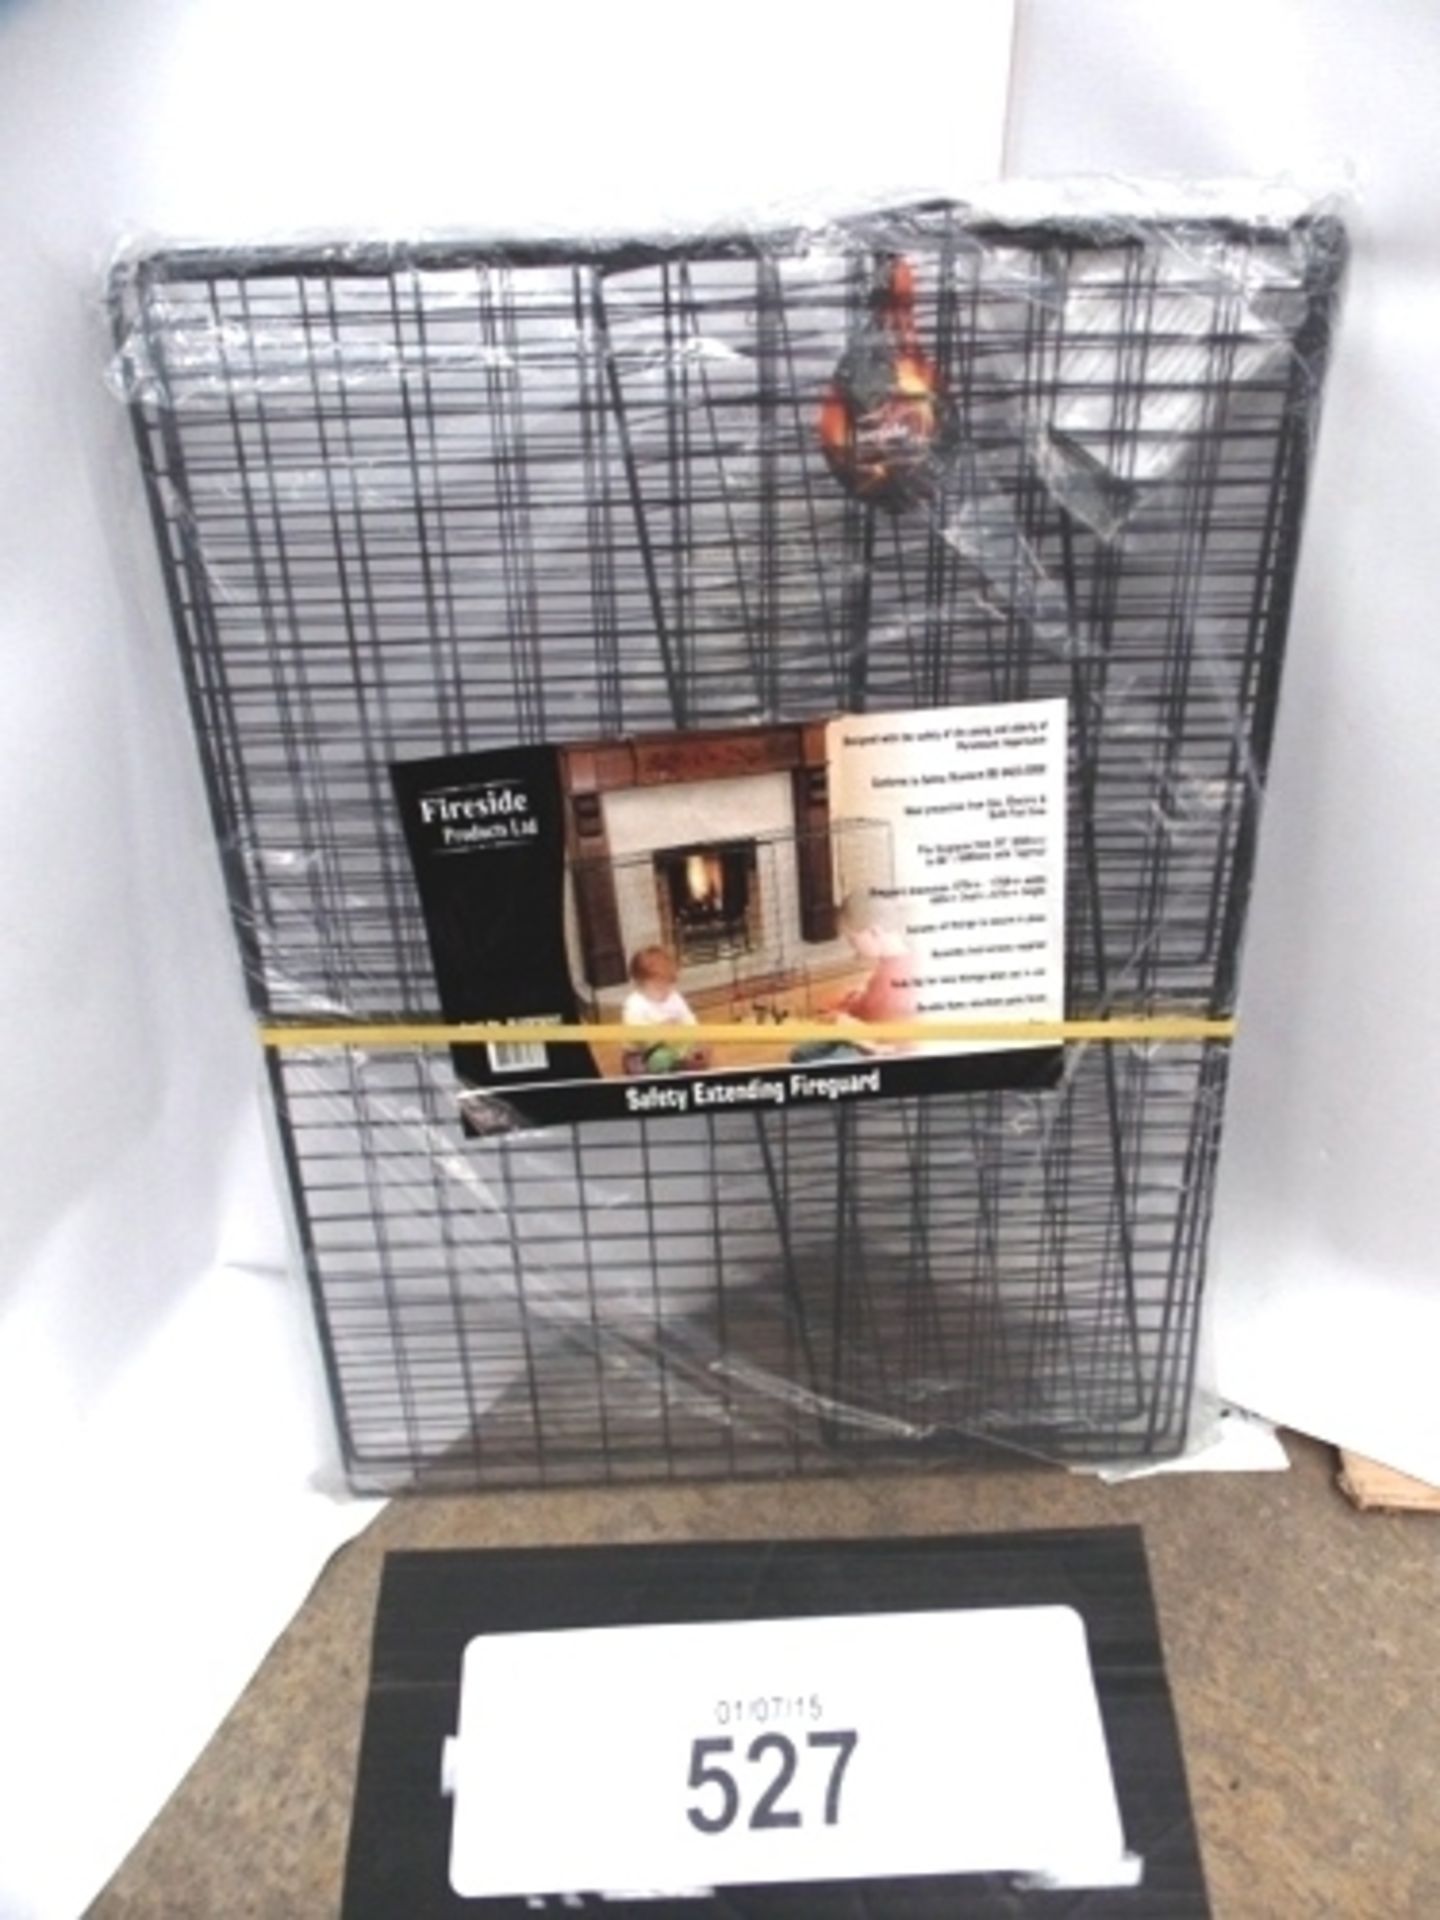 Fireside Products Ltd, wired metal/mesh safety extending fireguard screen, model BLKSFGEXT - New